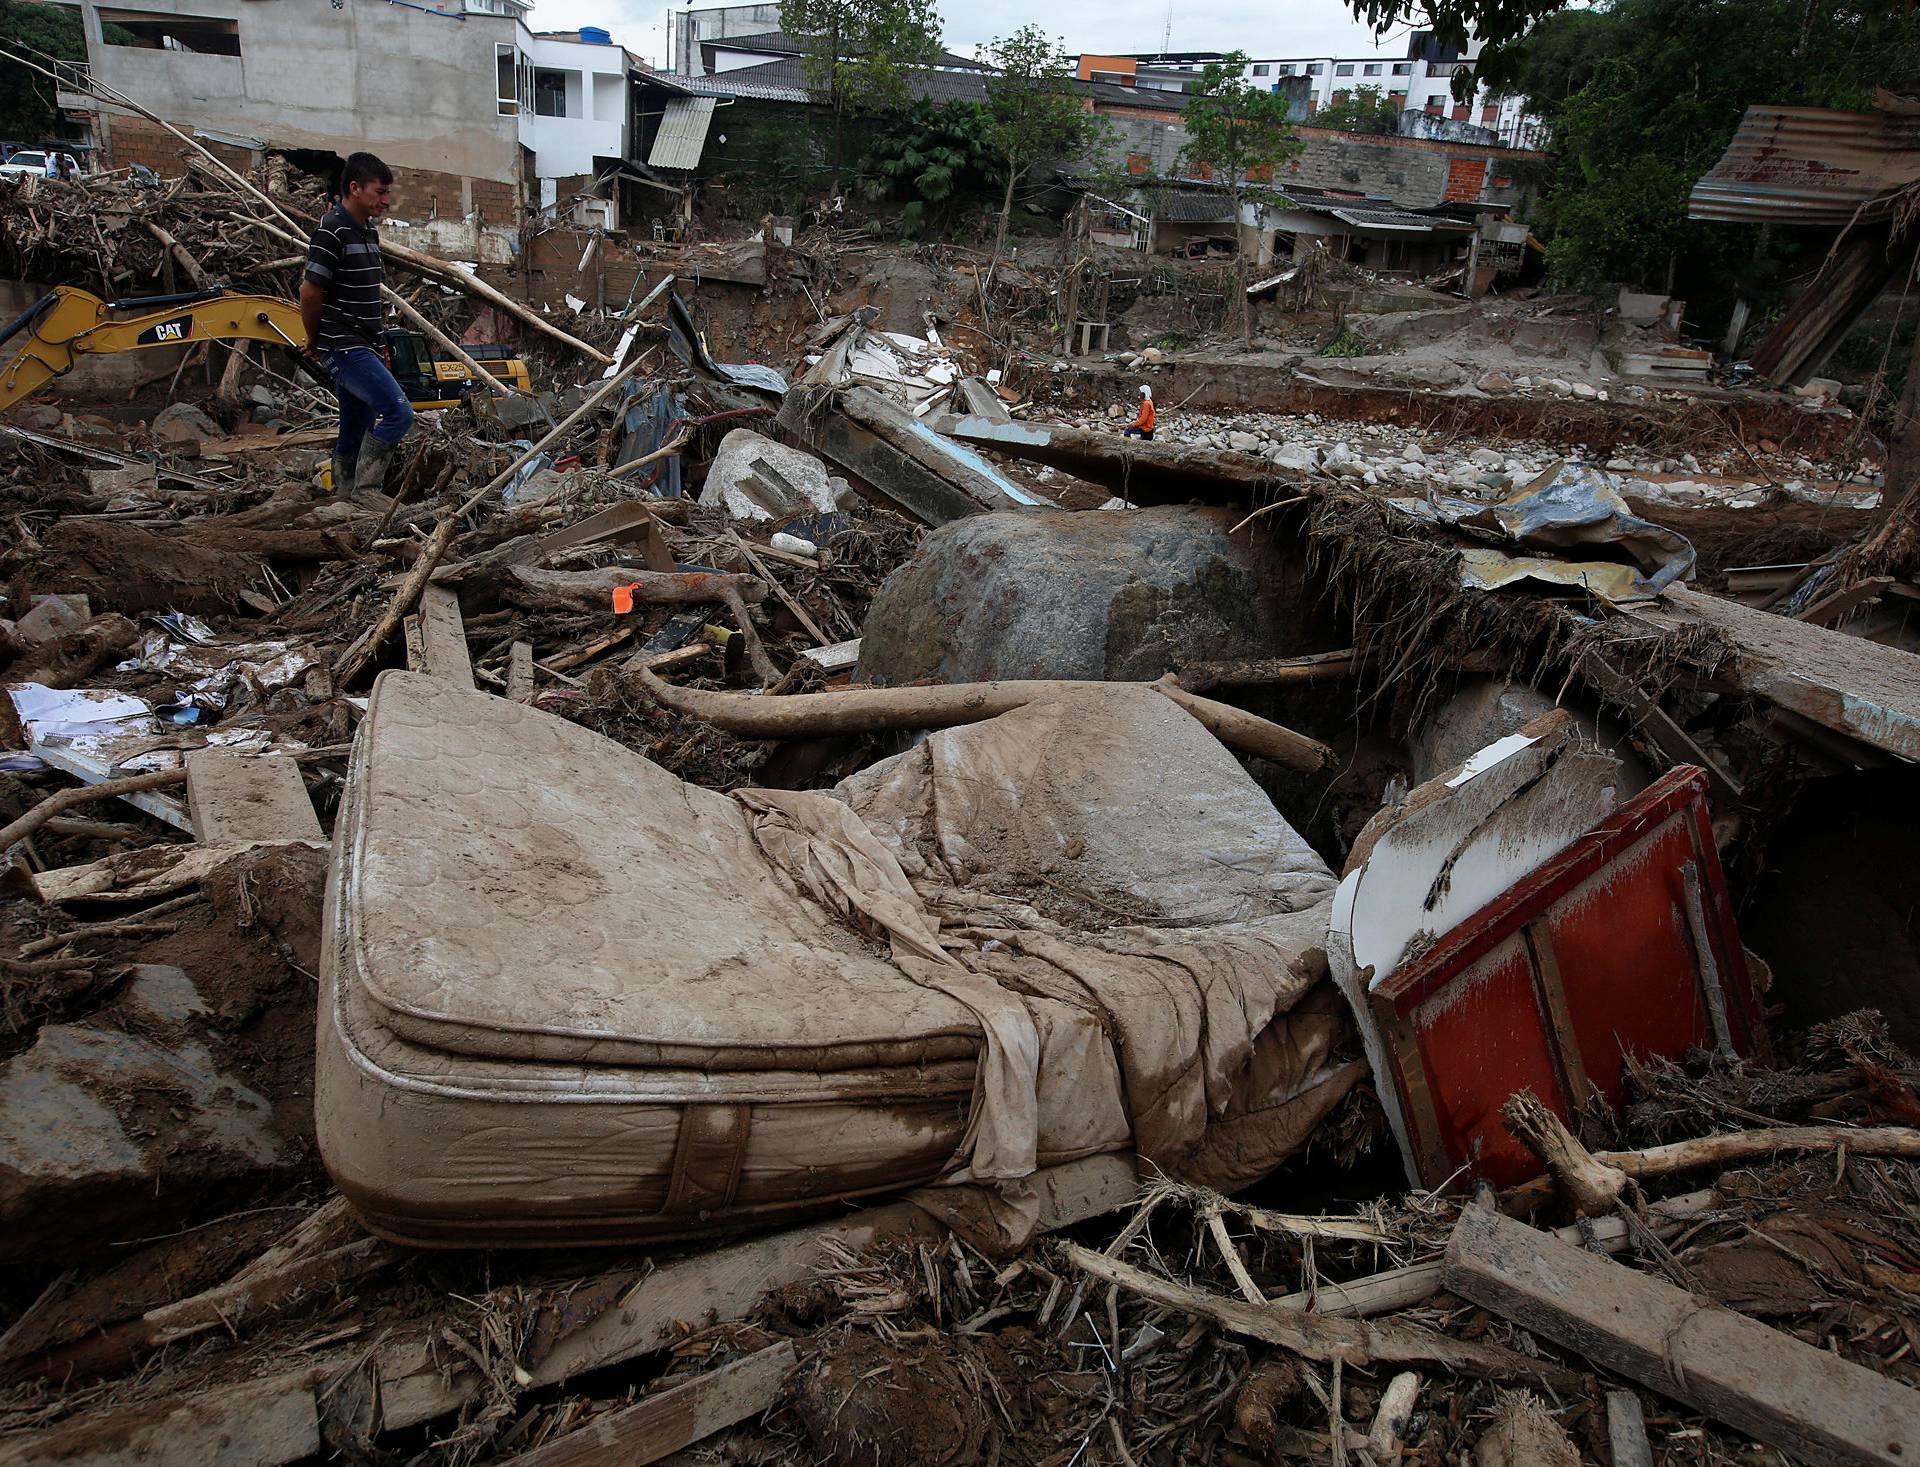 A man looks at a destroyed area, after flooding and mudslides caused by heavy rains leading several rivers to overflow, pushing sediment and rocks into buildings and roads, in Mocoa